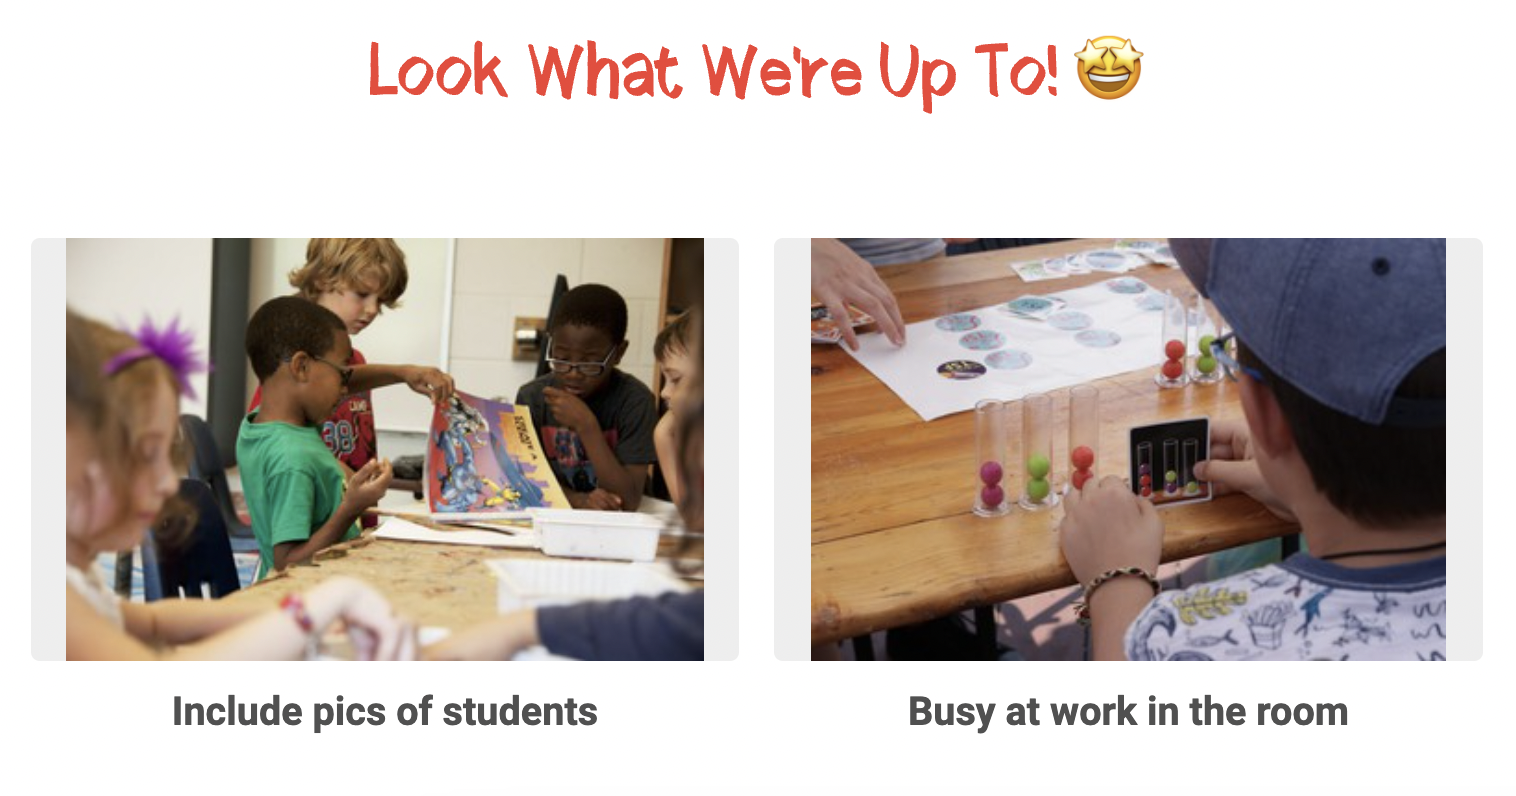 Screen shots of students at work in the classroom